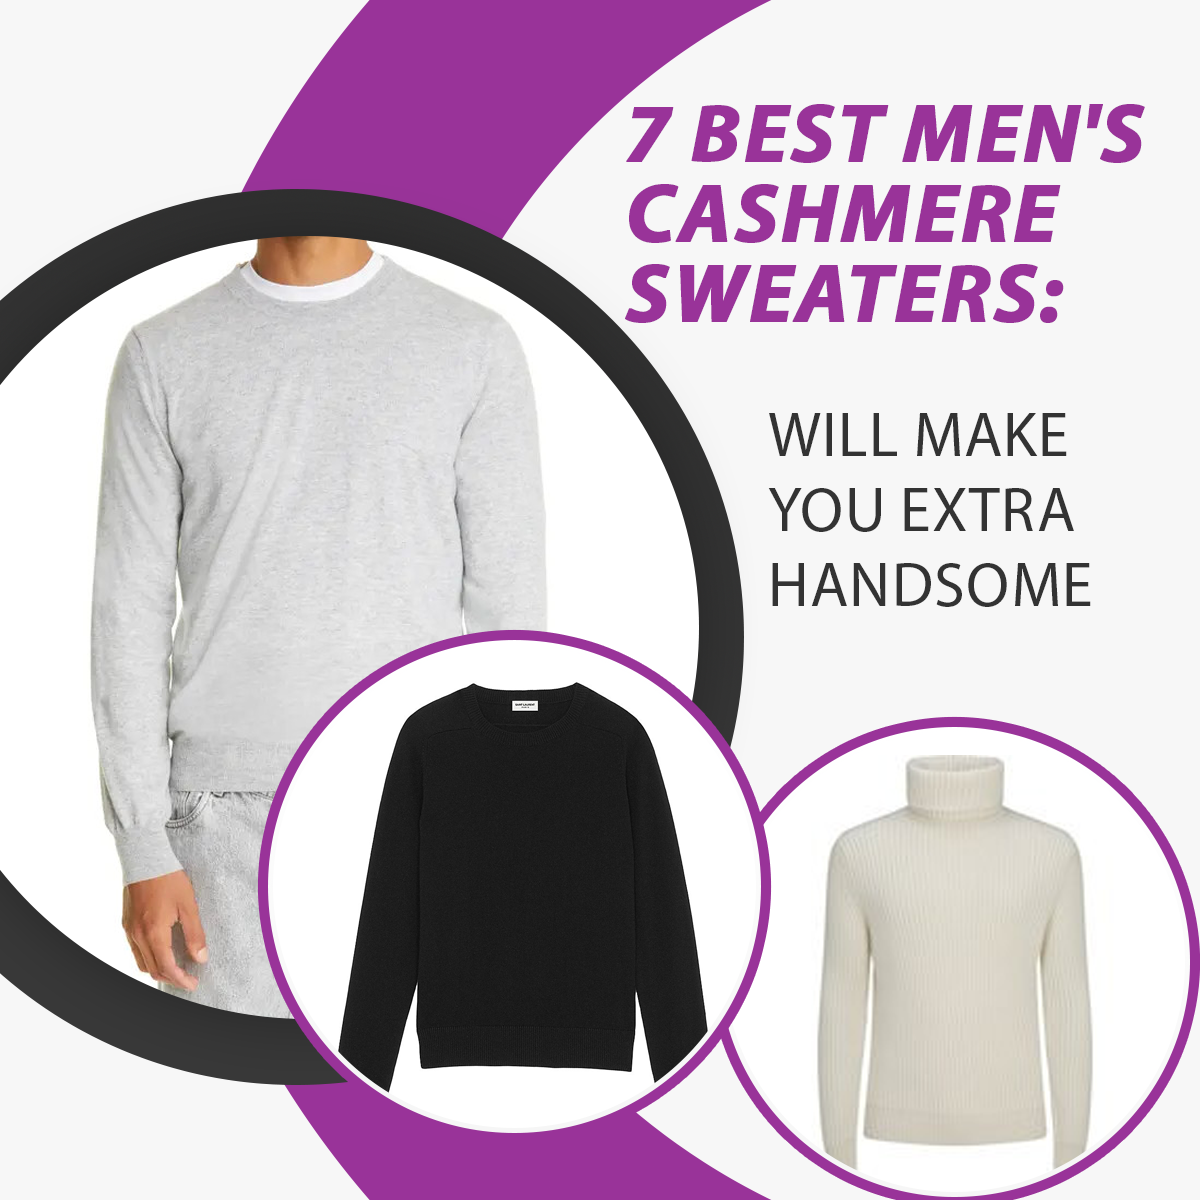 7 Best Men’s Cashmere Sweaters: Will Make You Extra Handsome